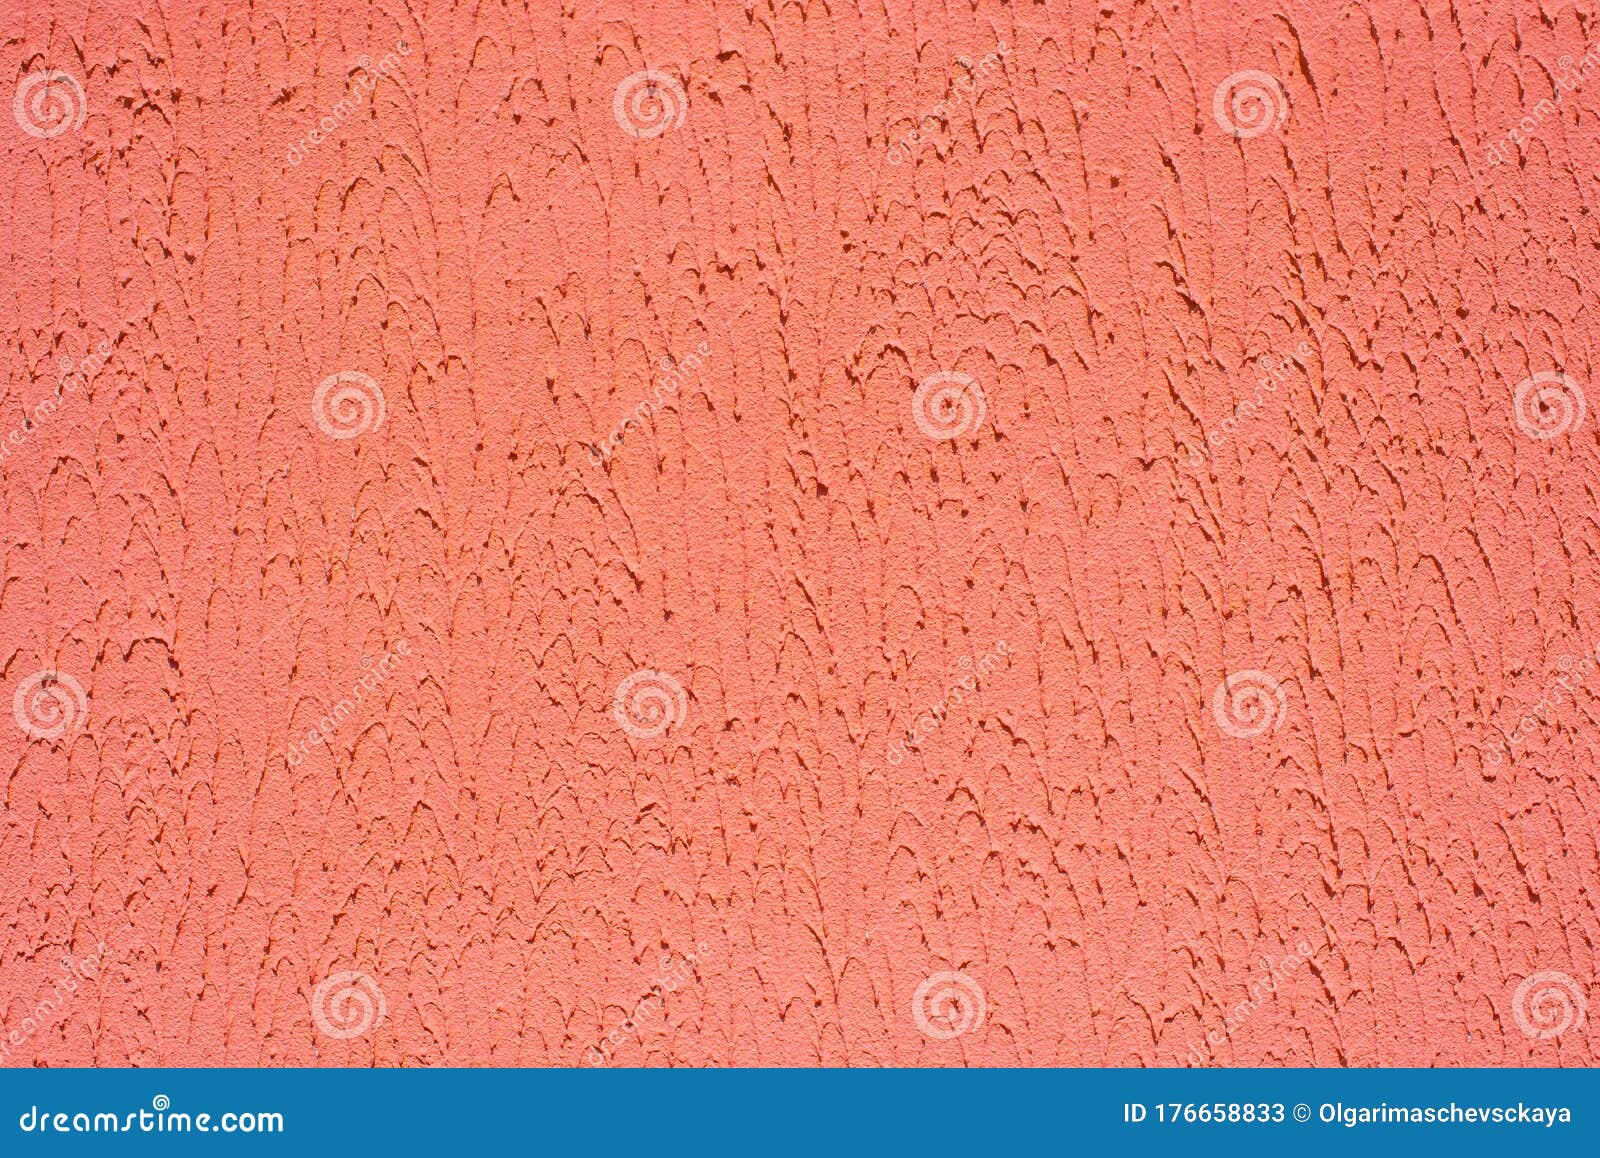 coral plaster wall. uneven texture of putty on the wall with copy space